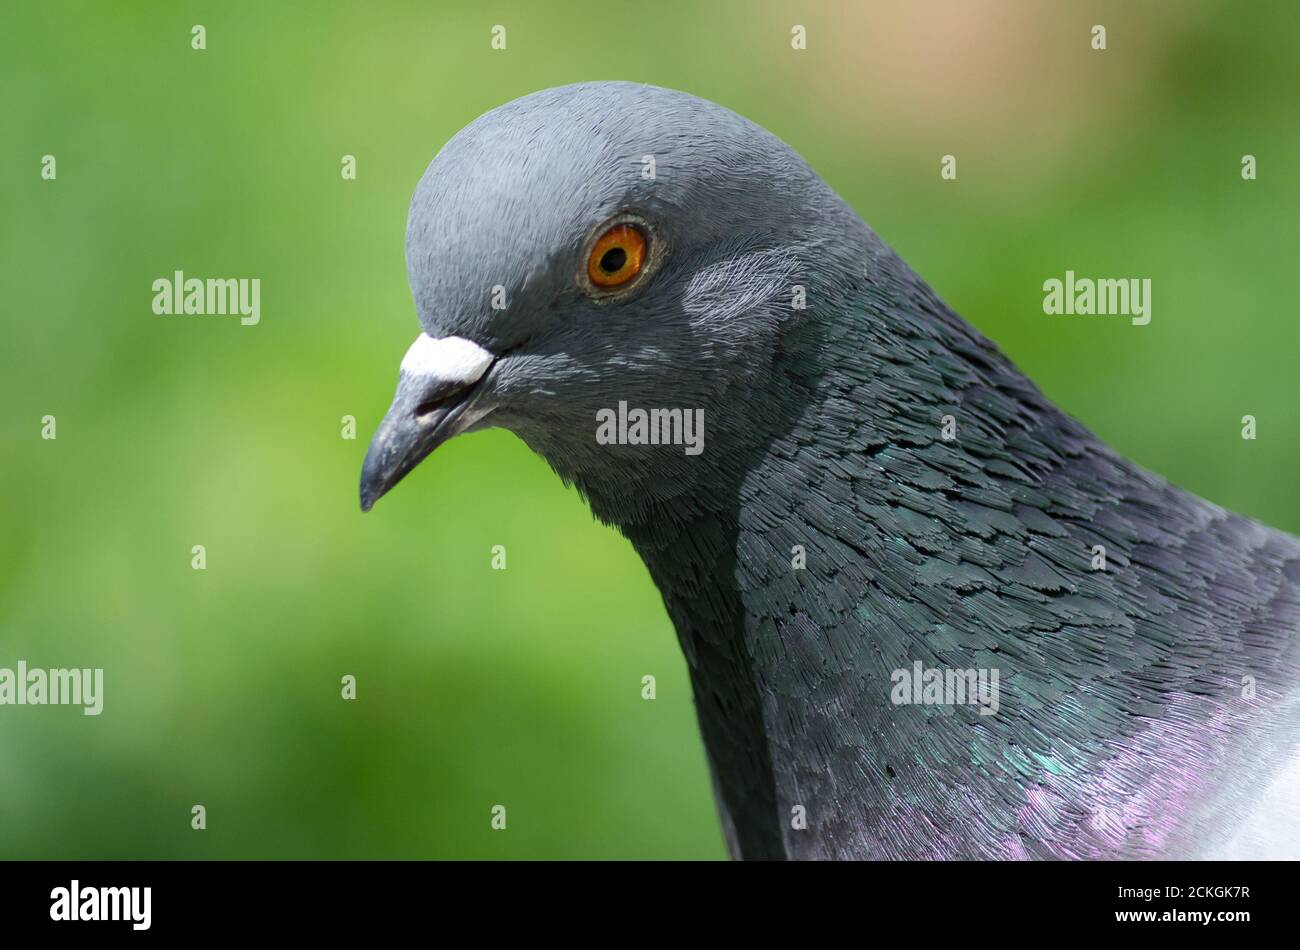 Pigeon head close up in sunlight on a blurry green background Stock Photo